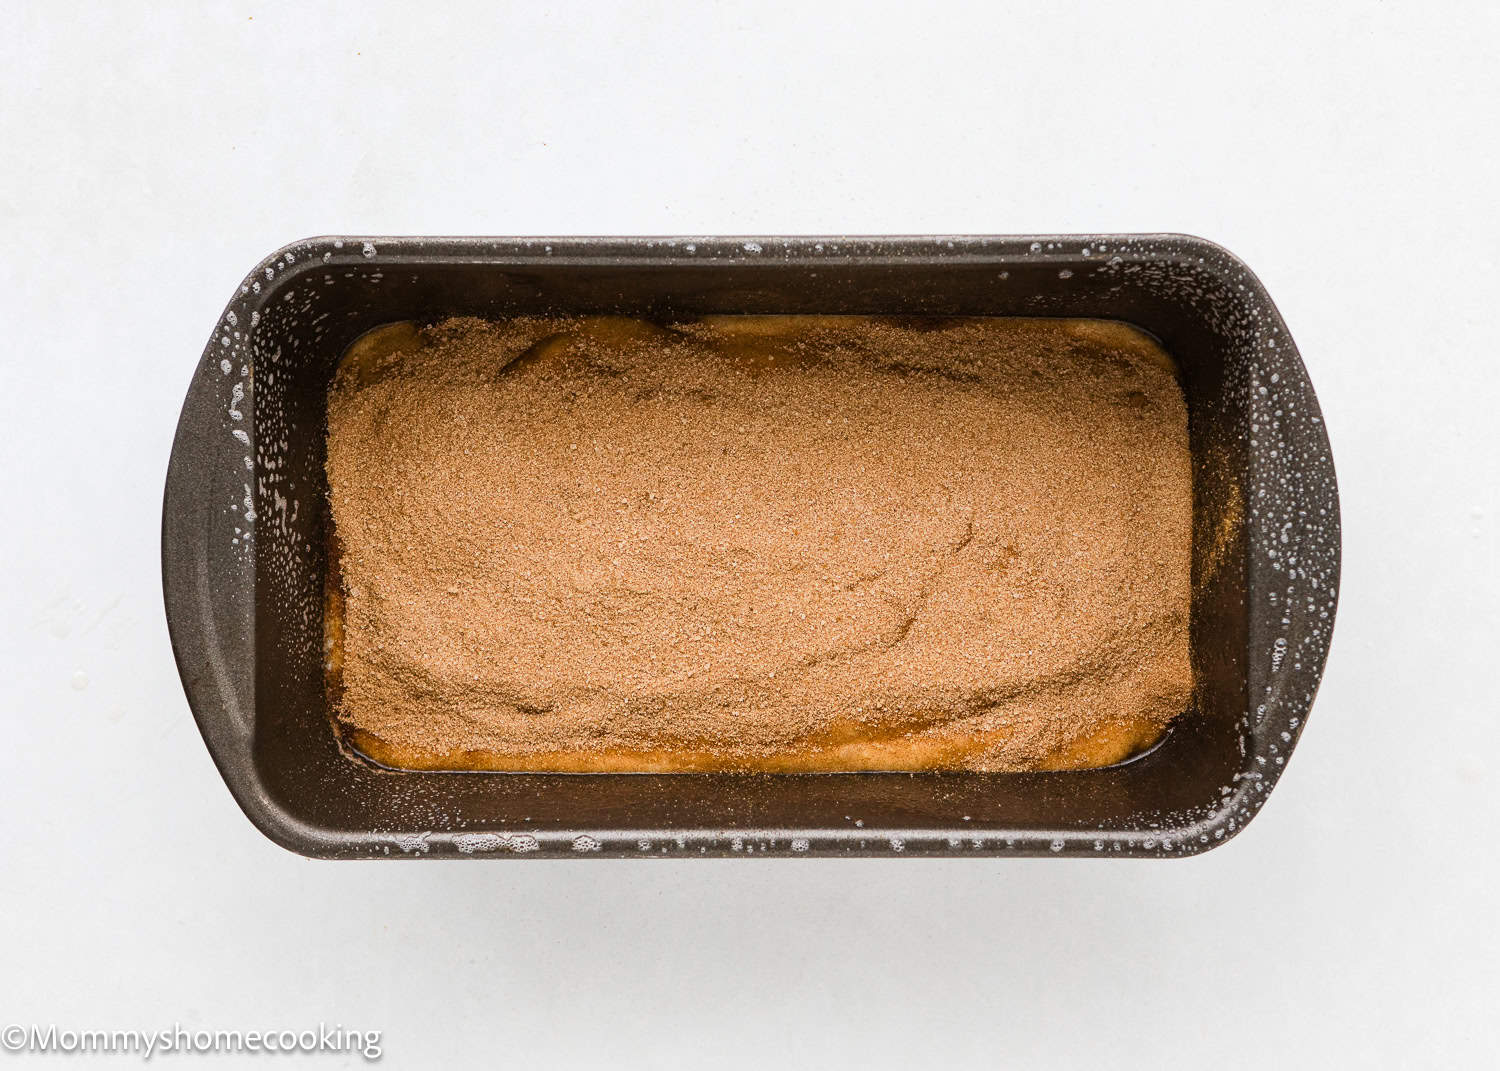 a whole unbaked Vegan Cinnamon Swirl Quick Bread batter with cinnamon-sugar on top in a loaf pan.